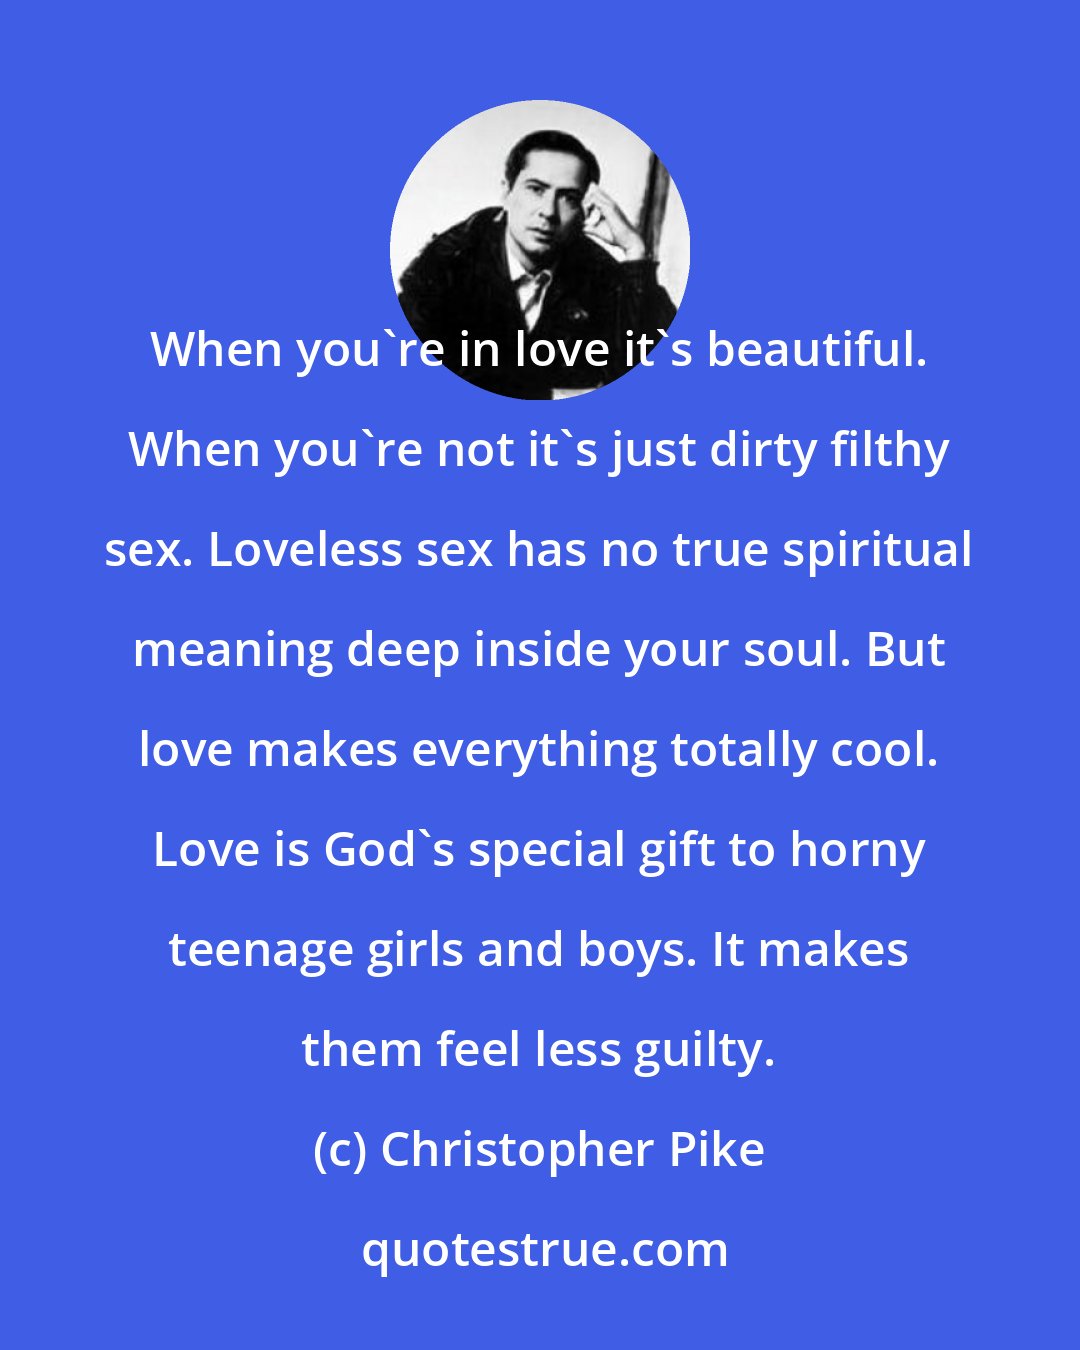 Christopher Pike: When you're in love it's beautiful. When you're not it's just dirty filthy sex. Loveless sex has no true spiritual meaning deep inside your soul. But love makes everything totally cool. Love is God's special gift to horny teenage girls and boys. It makes them feel less guilty.